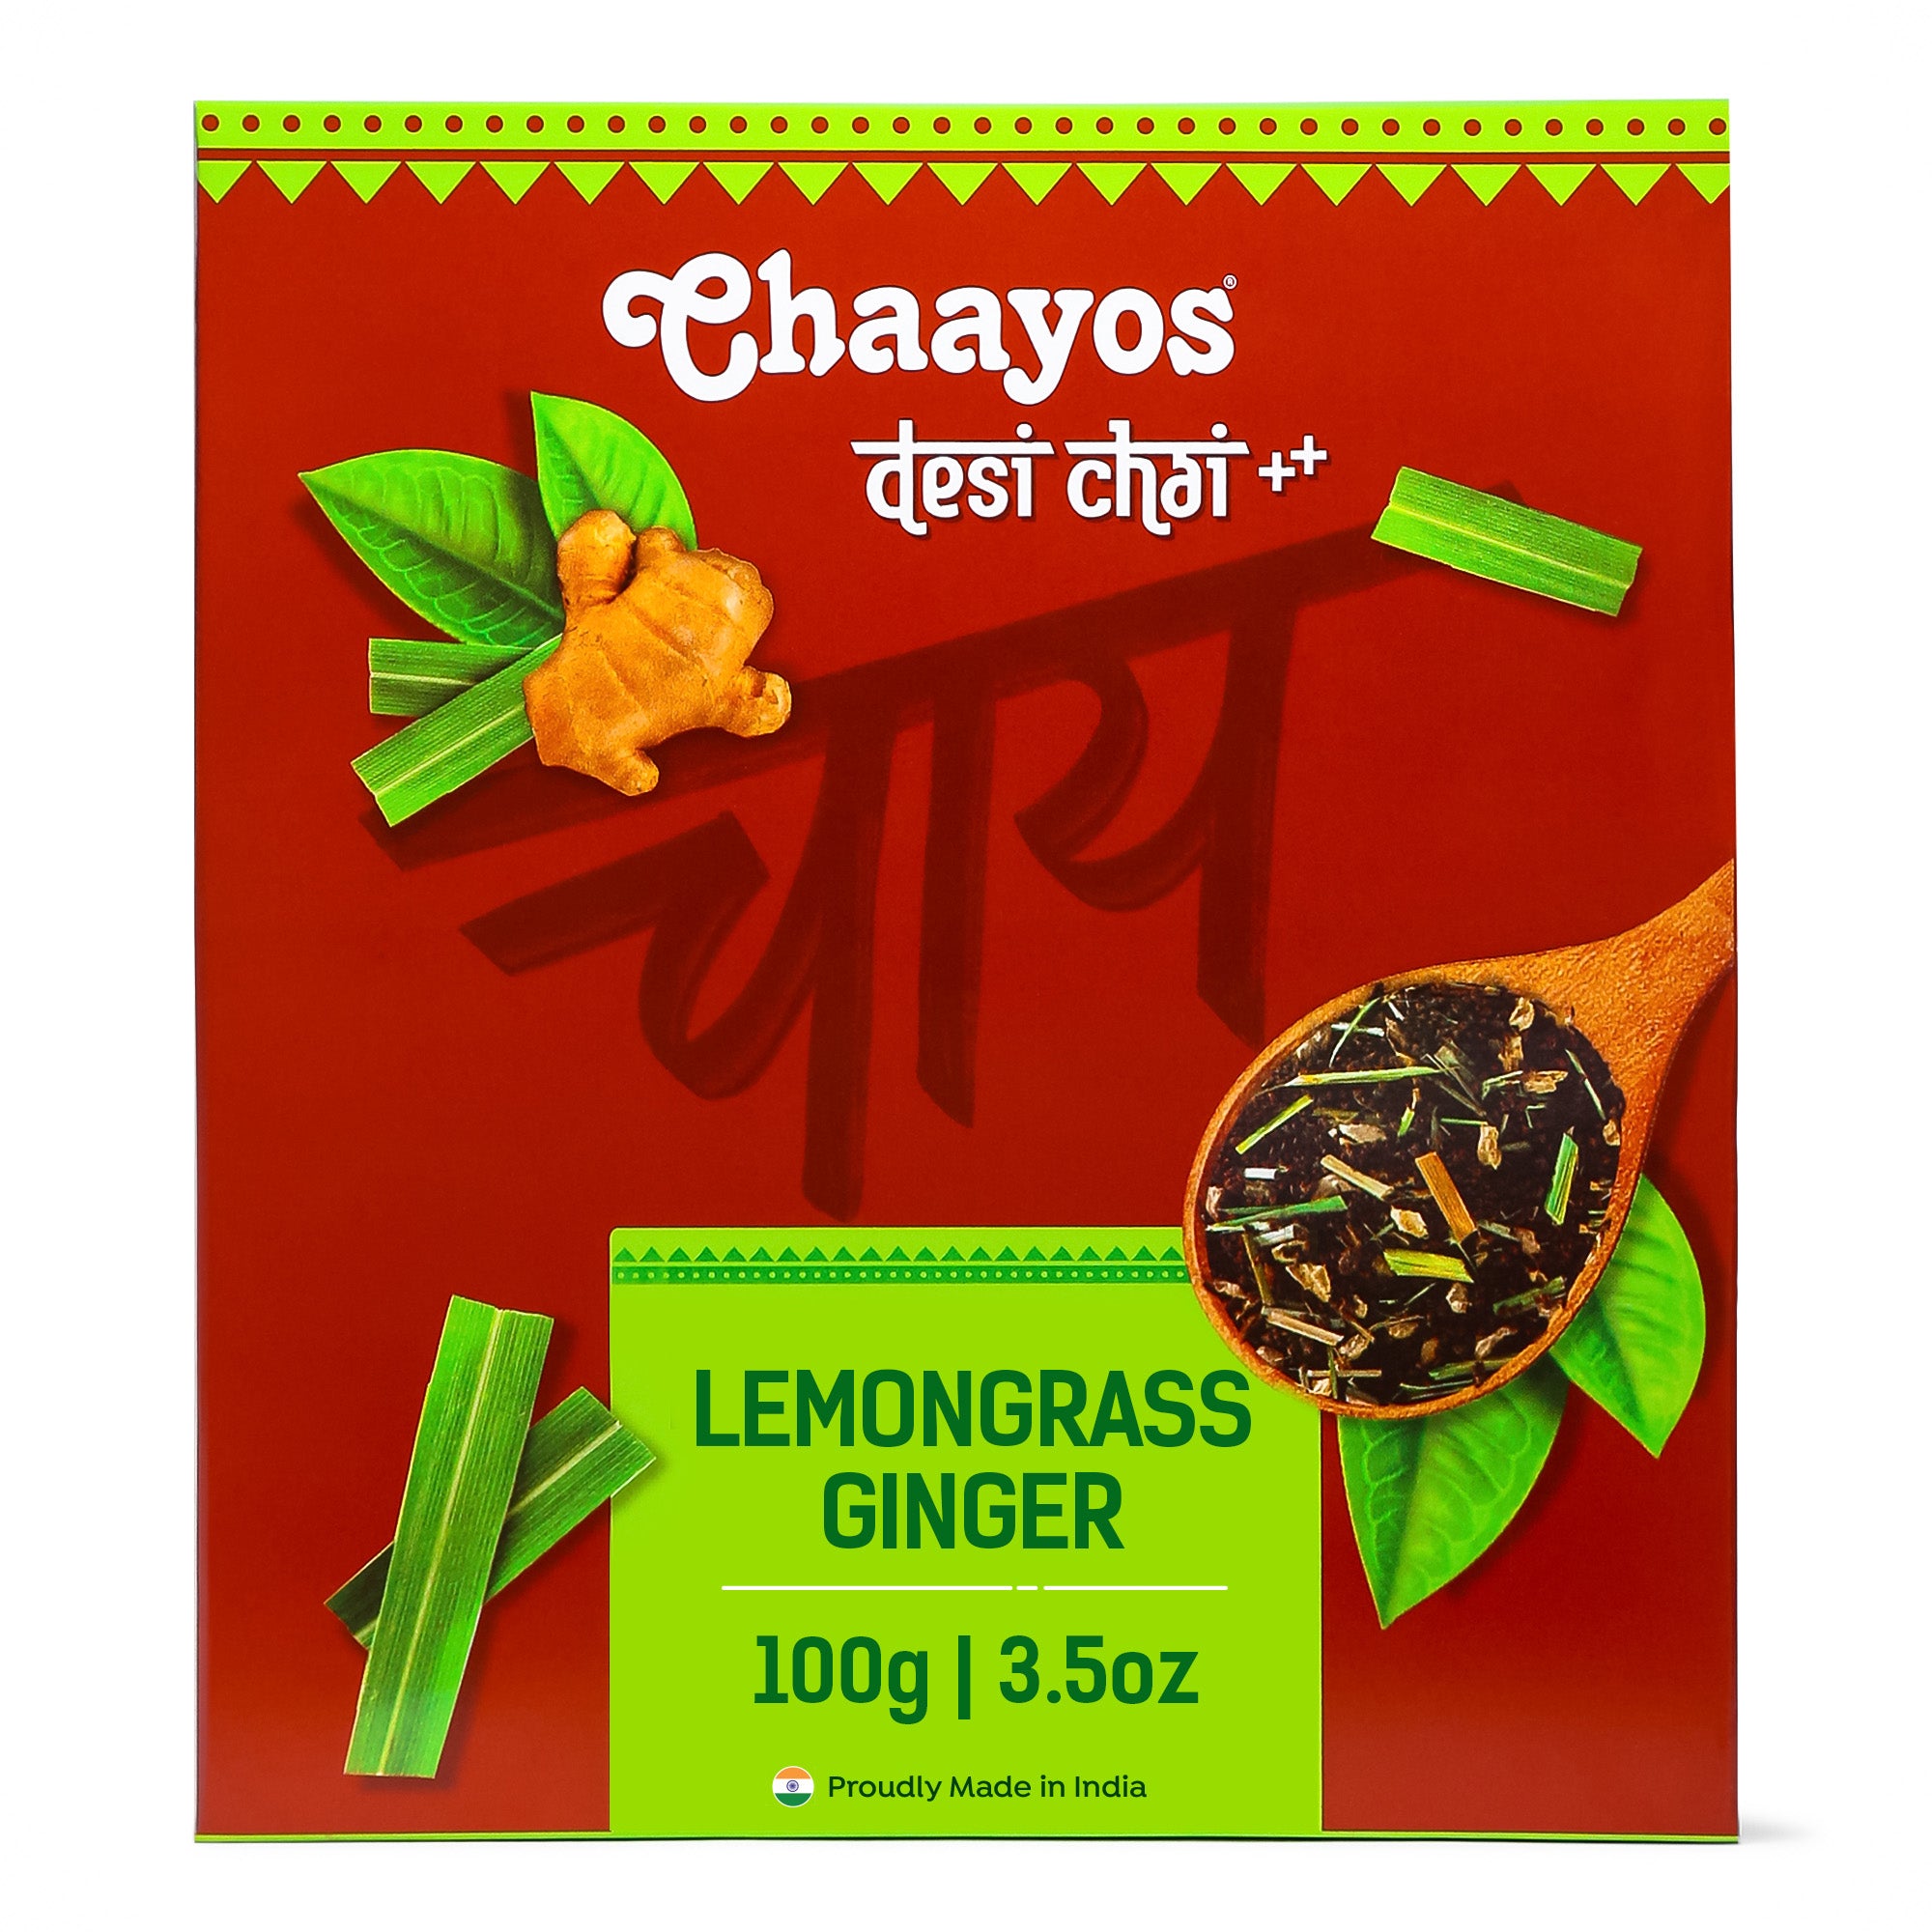 Chaayos Lemongrass Ginger Tea - Premium Ginger Chai Patti for Cough & Cold Remedy (100g)